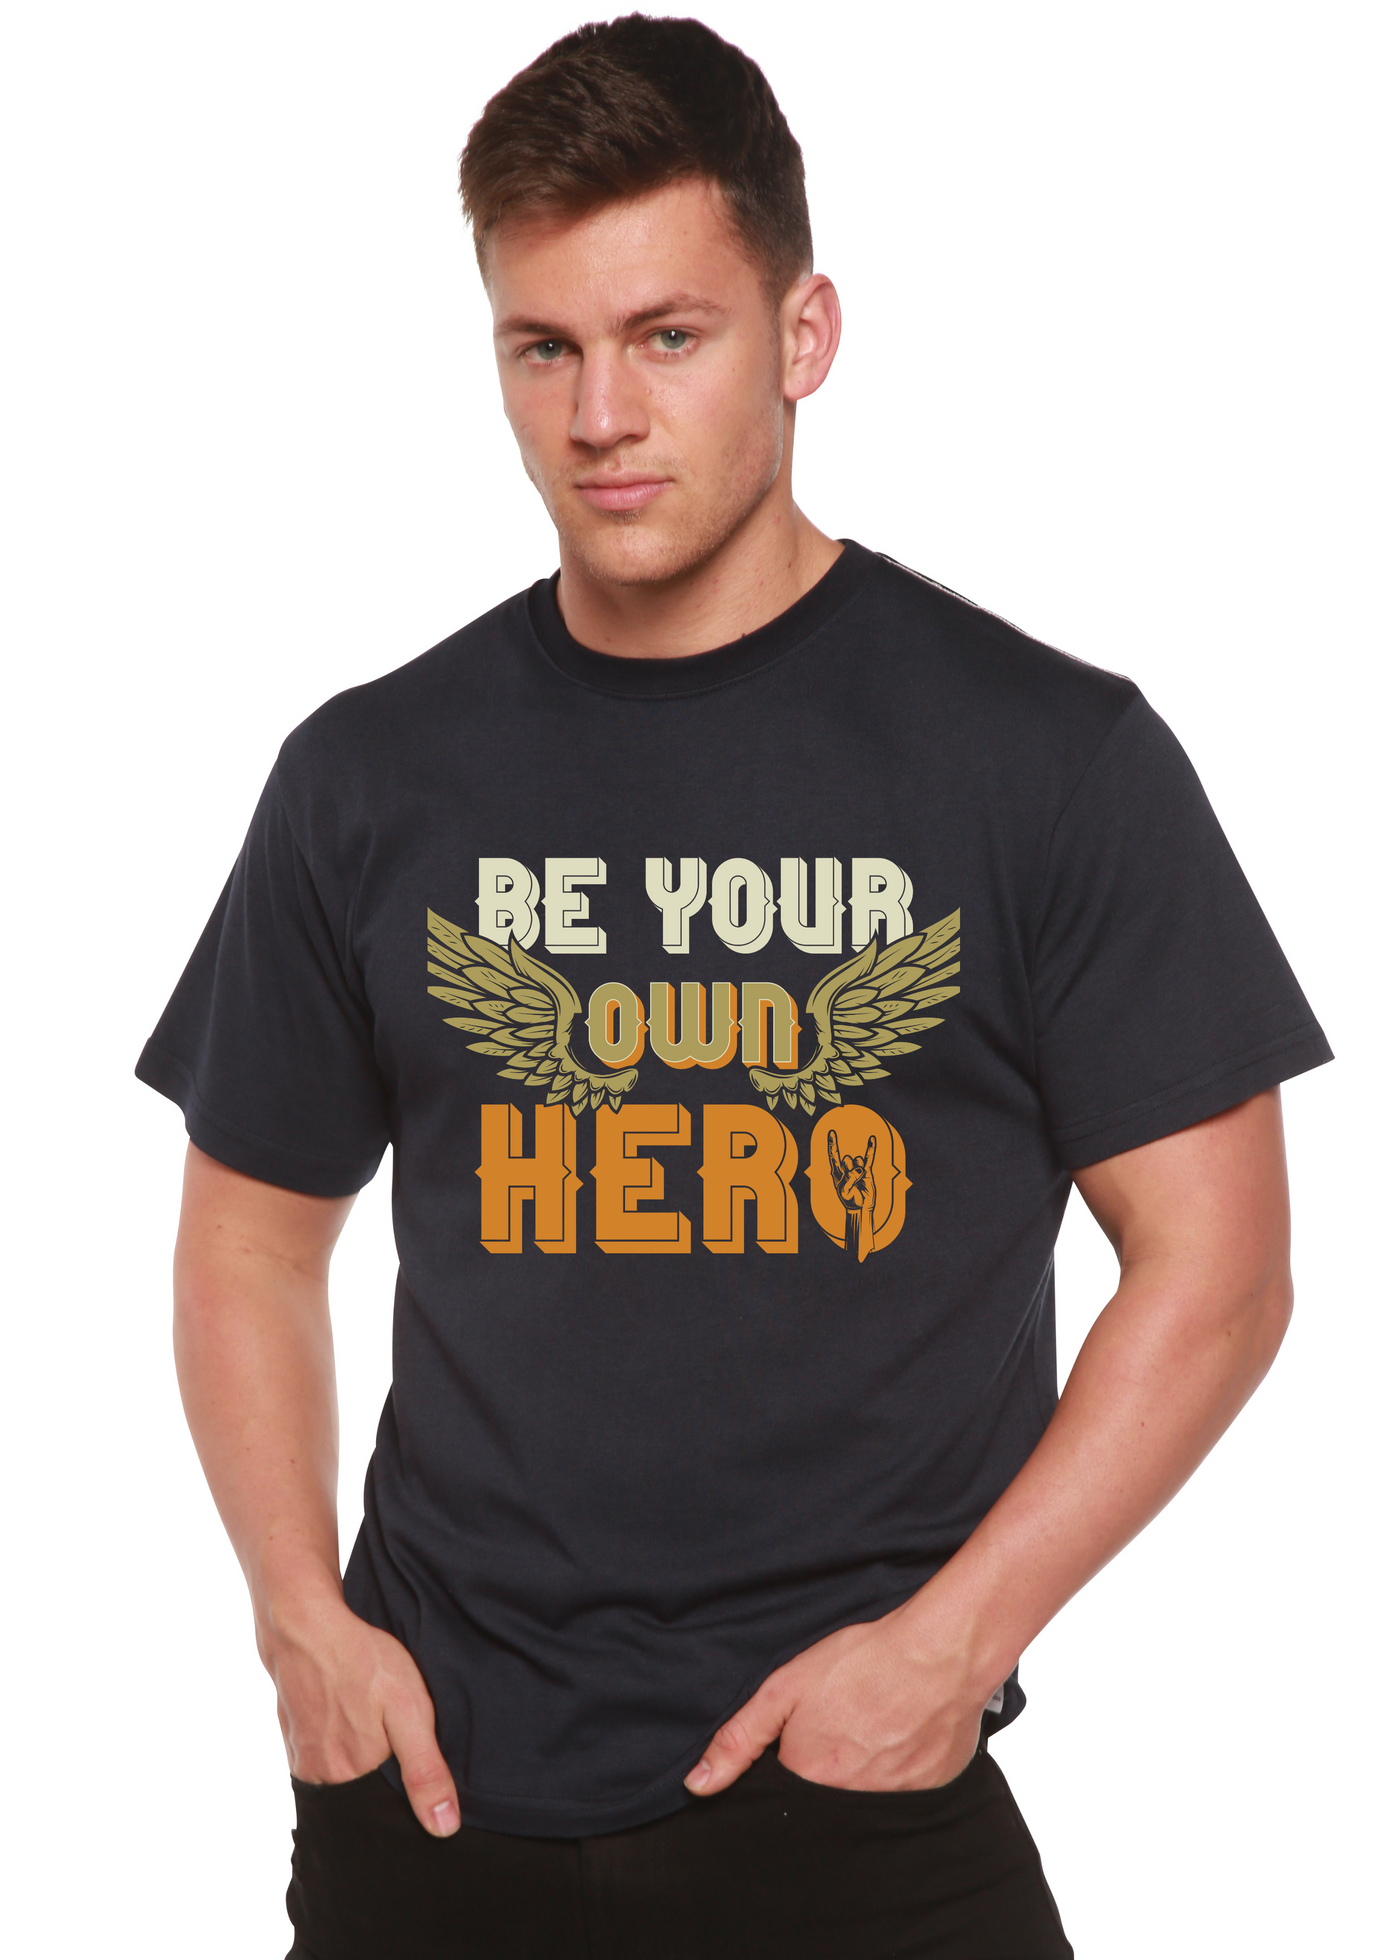 Be Your Own Hero men's bamboo tshirt navy blue